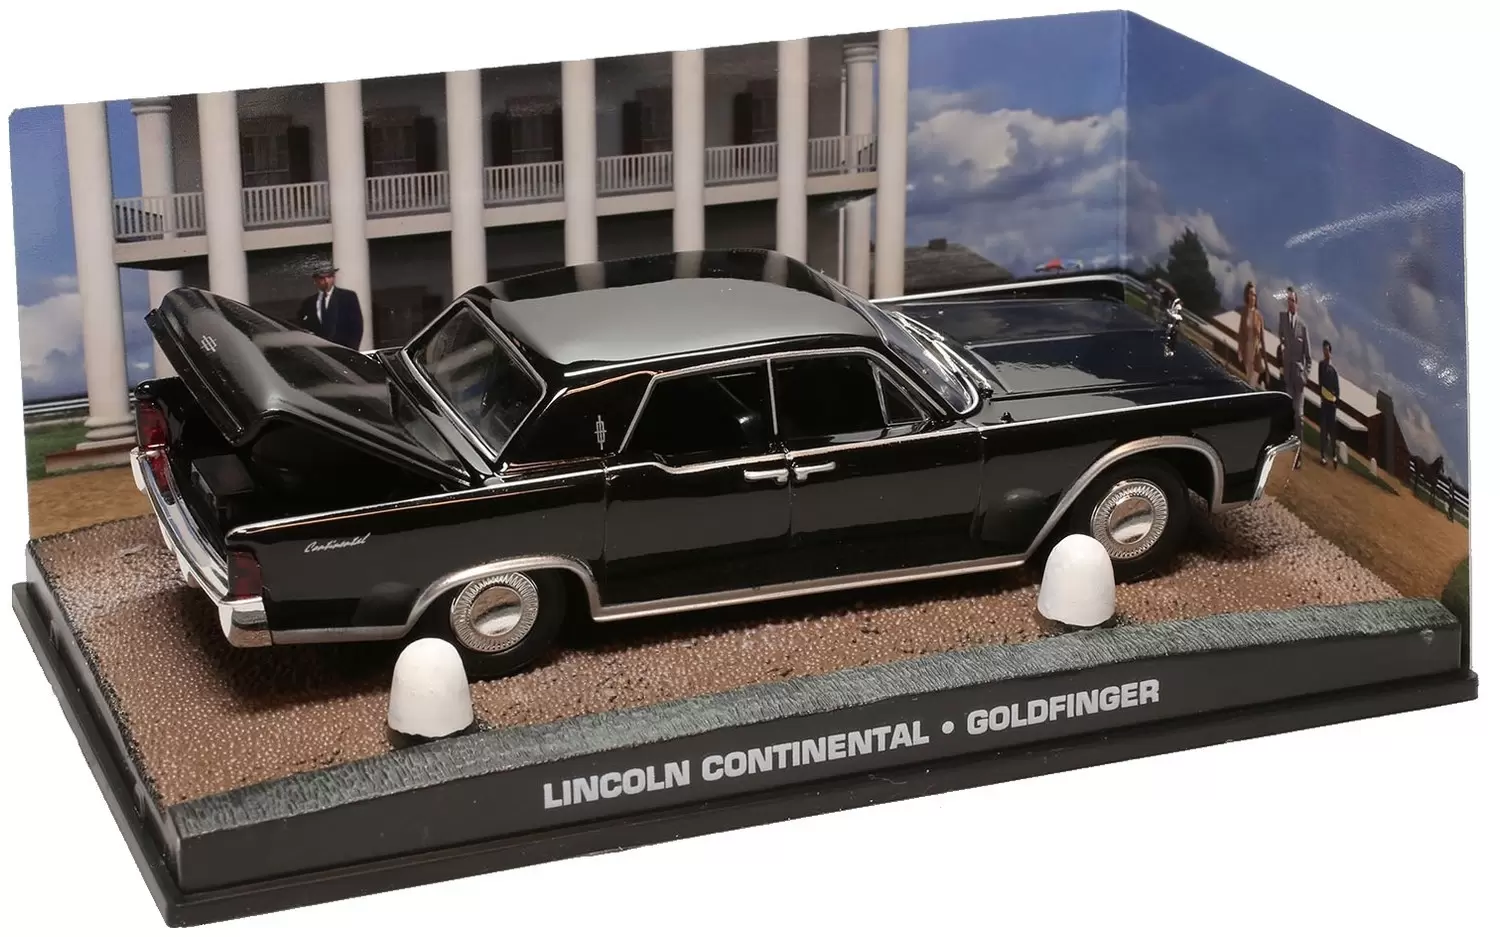 The James Bond Car collection - Lincoln Continental (1964)